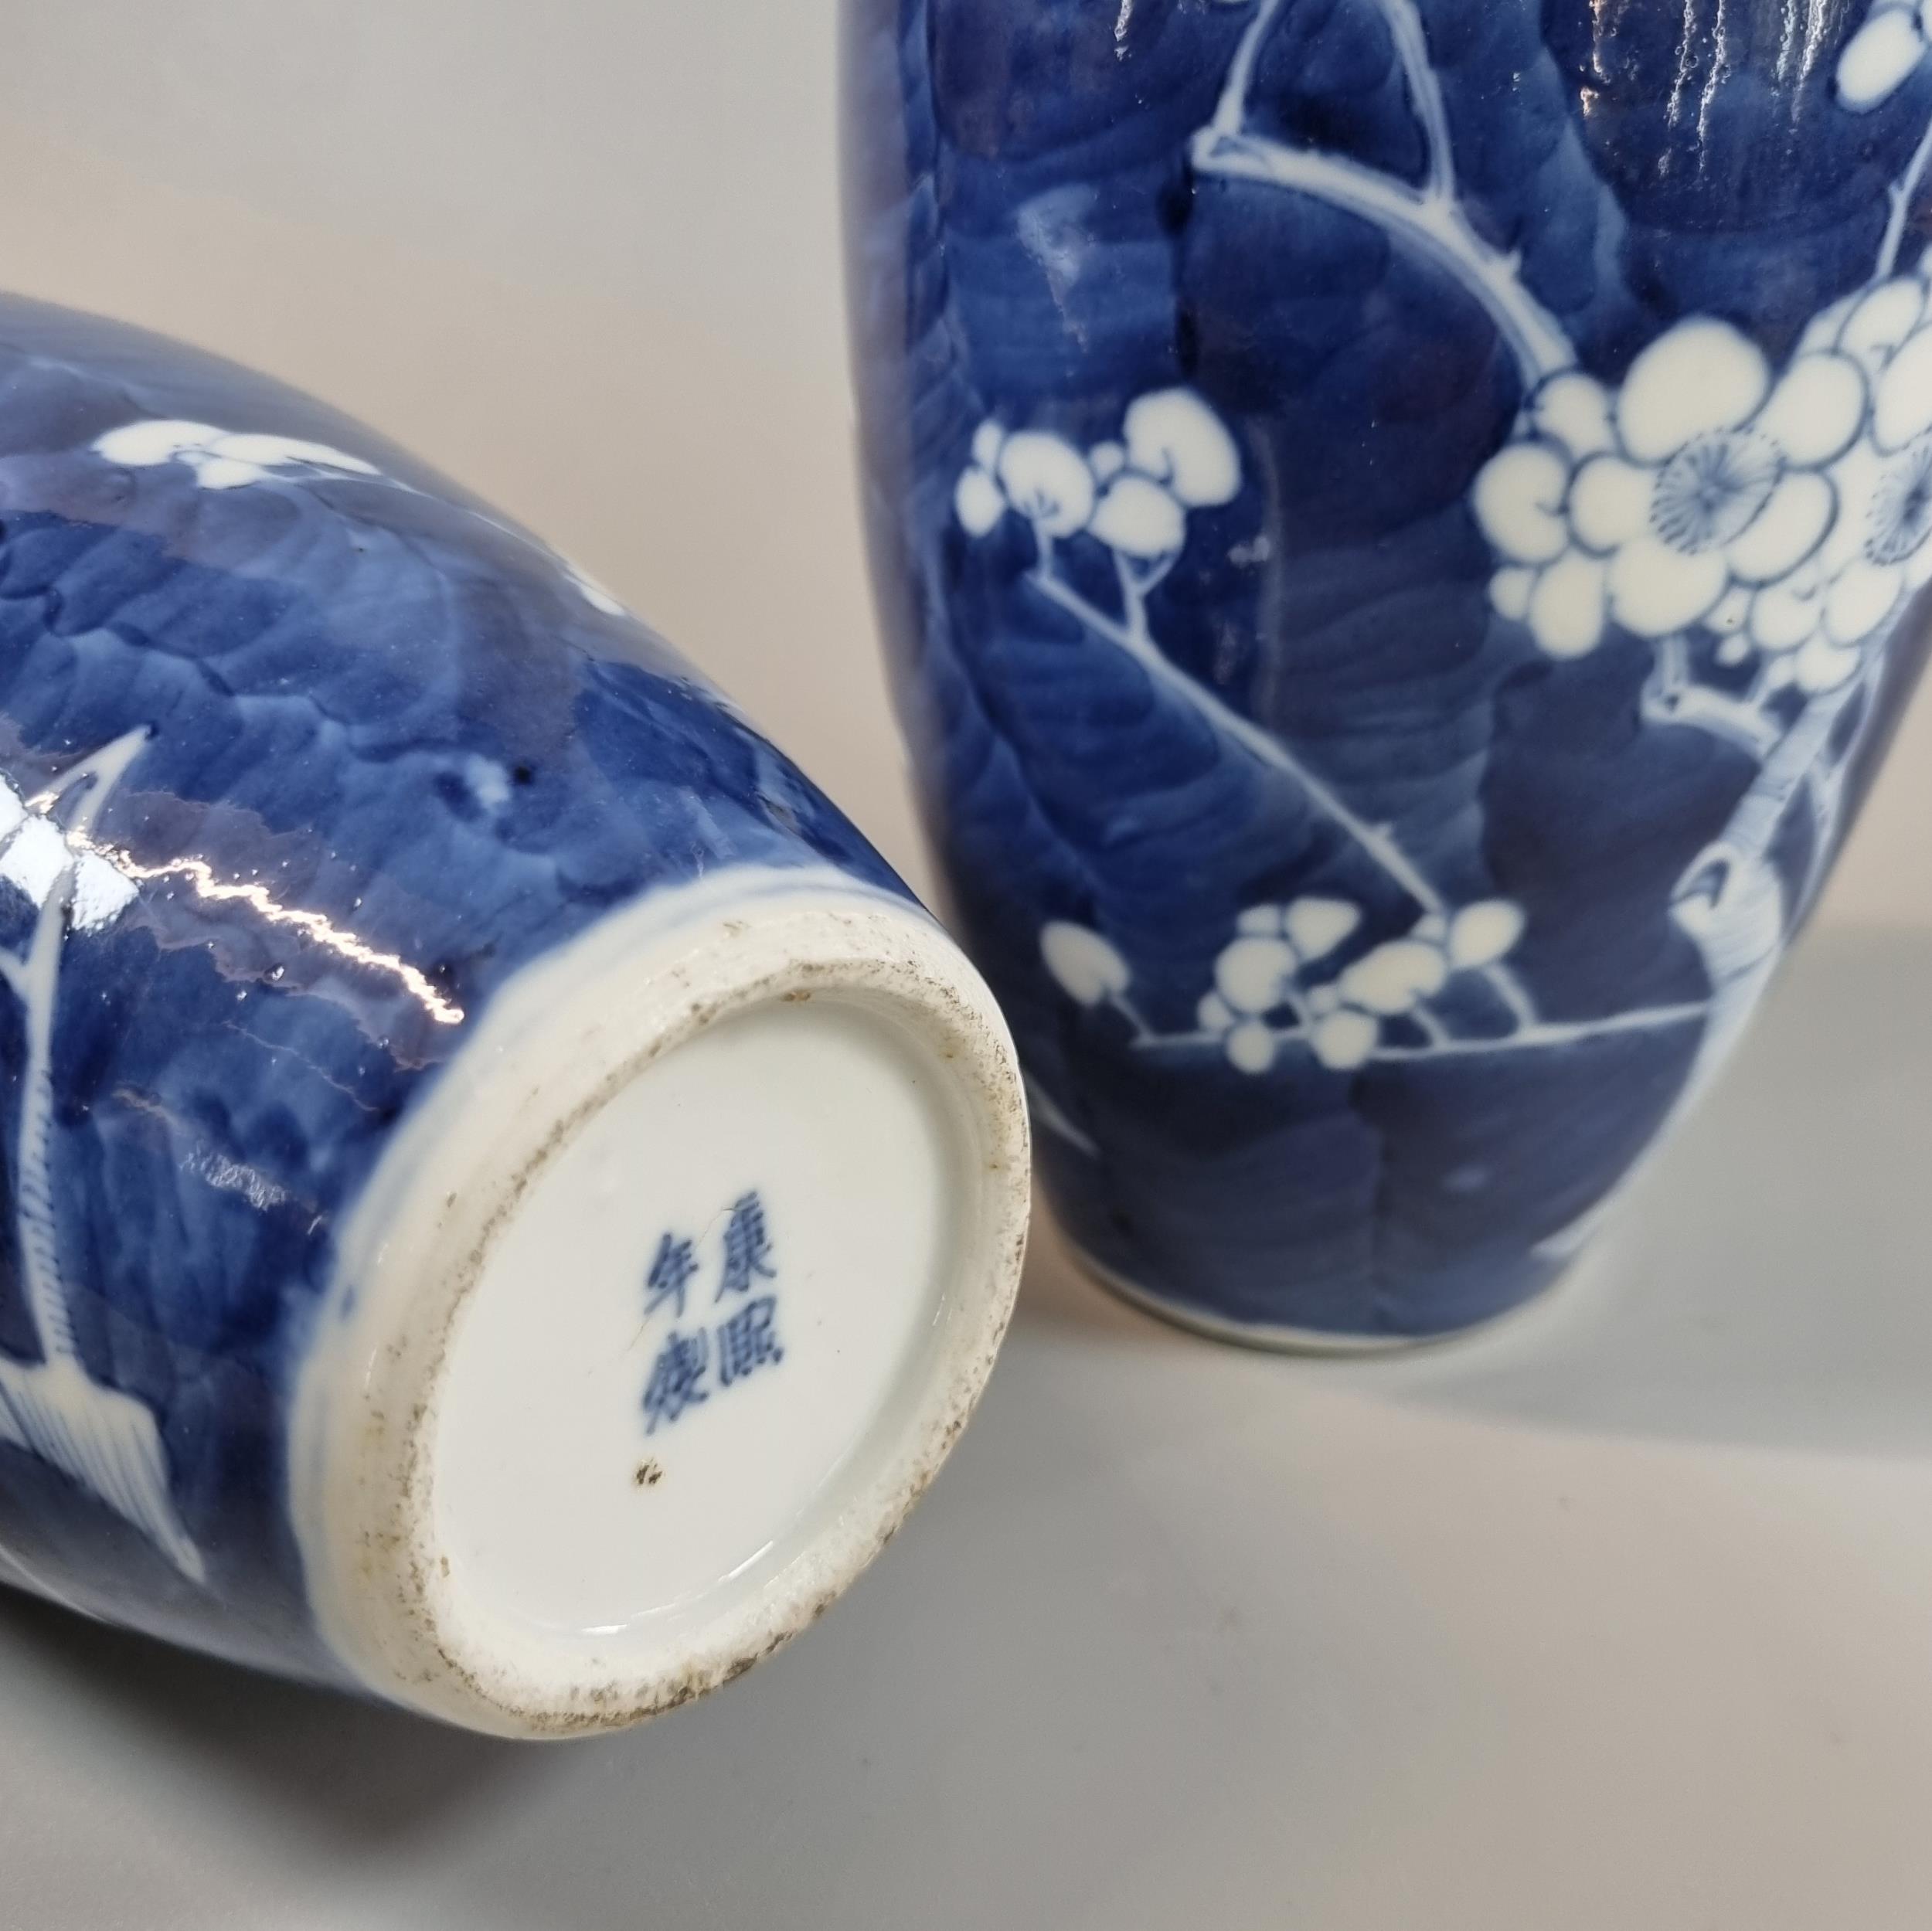 Pair of Chinese export porcelain blue and white baluster vases depicting flower and prunus - Image 2 of 8